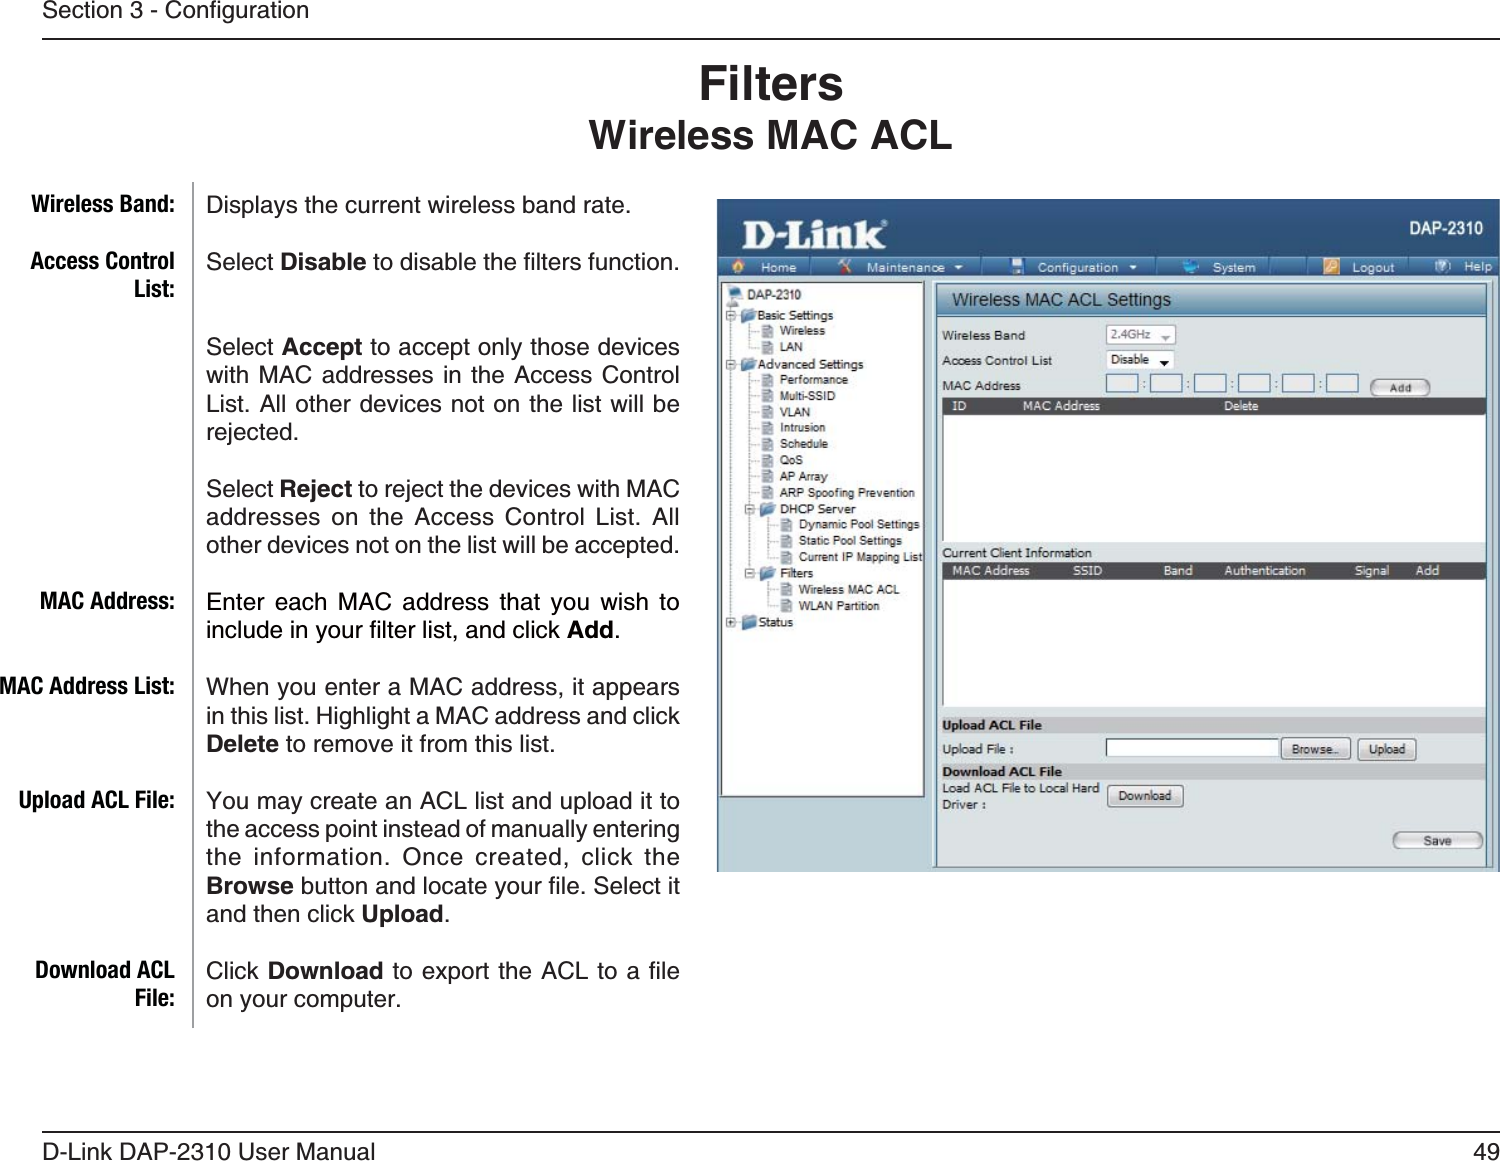 49D-Link DAP-2310 User ManualFiltersWireless MAC ACLDisplays the current wireless band rate. Select Disable Select Accept to accept only those devices with MAC addresses in the Access Control List. All other devices not on the list will be rejected.Select Reject to reject the devices with MAC addresses on the Access Control List. All other devices not on the list will be accepted.Enter each MAC address that you wish to Add.When you enter a MAC address, it appears in this list. Highlight a MAC address and click Delete to remove it from this list.the access point instead of manually entering the information. Once created, click the Browseand then click Upload.Click Downloadon your computer.Wireless Band:Access Control List:MAC Address:MAC Address List:Upload ACL File:Download ACL File: